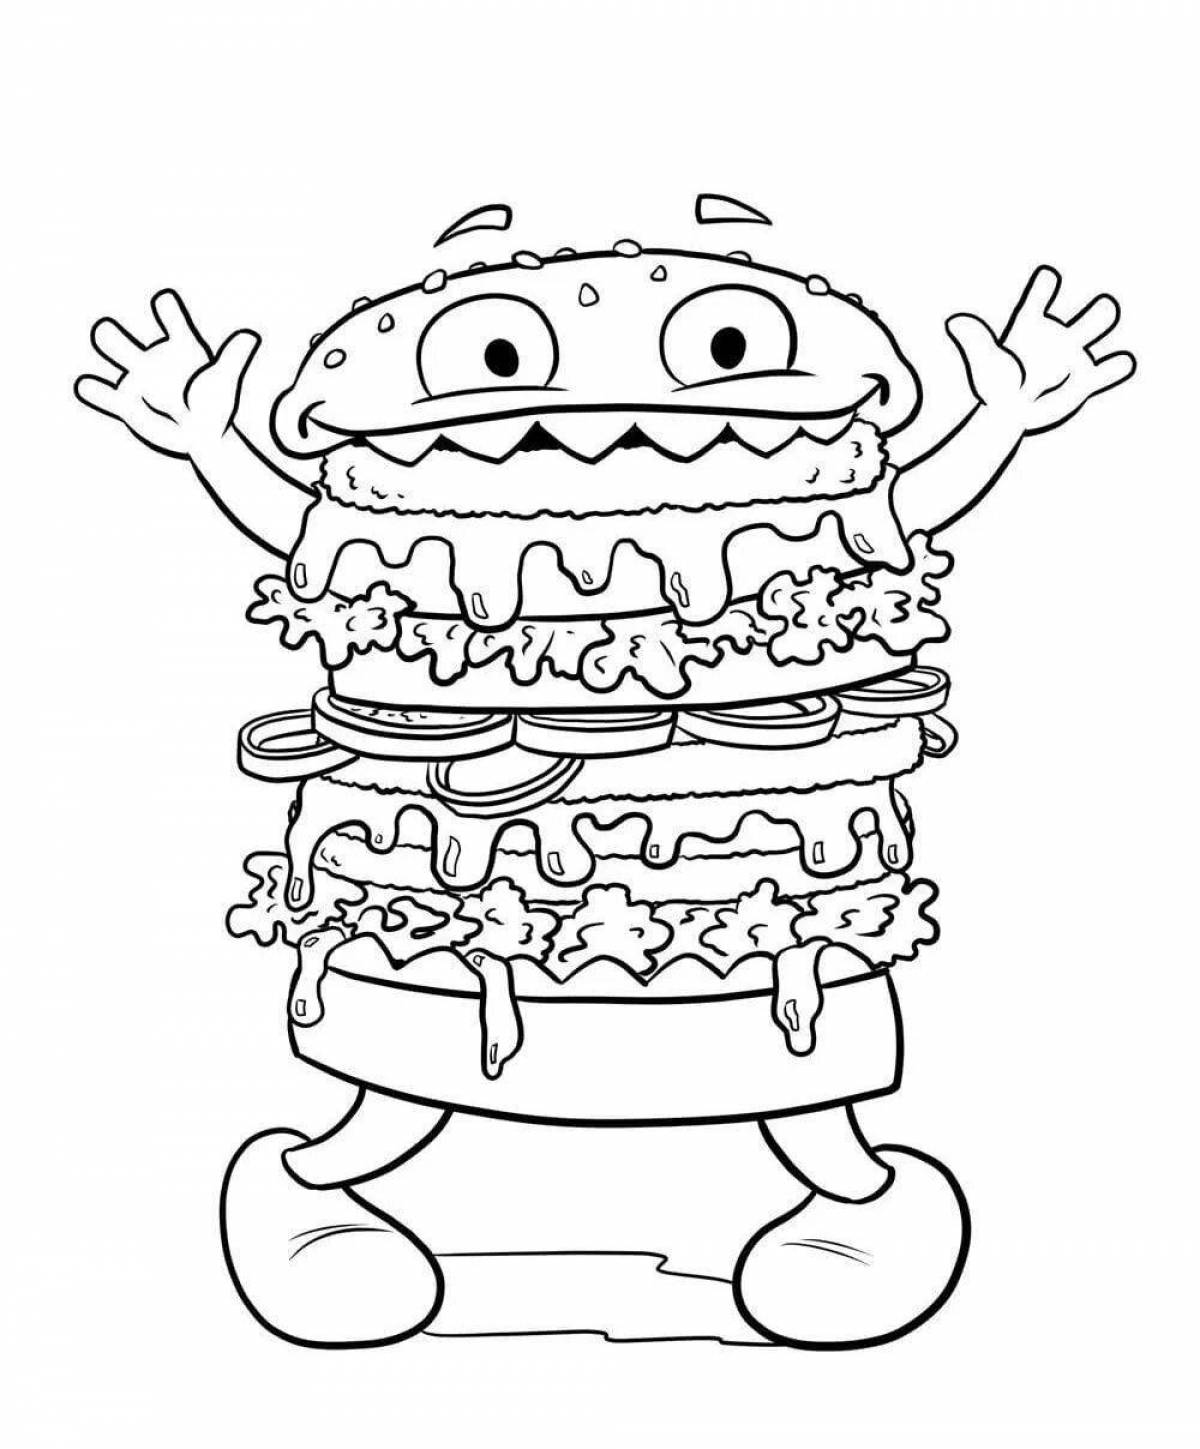 Glitter burger coloring page for kids